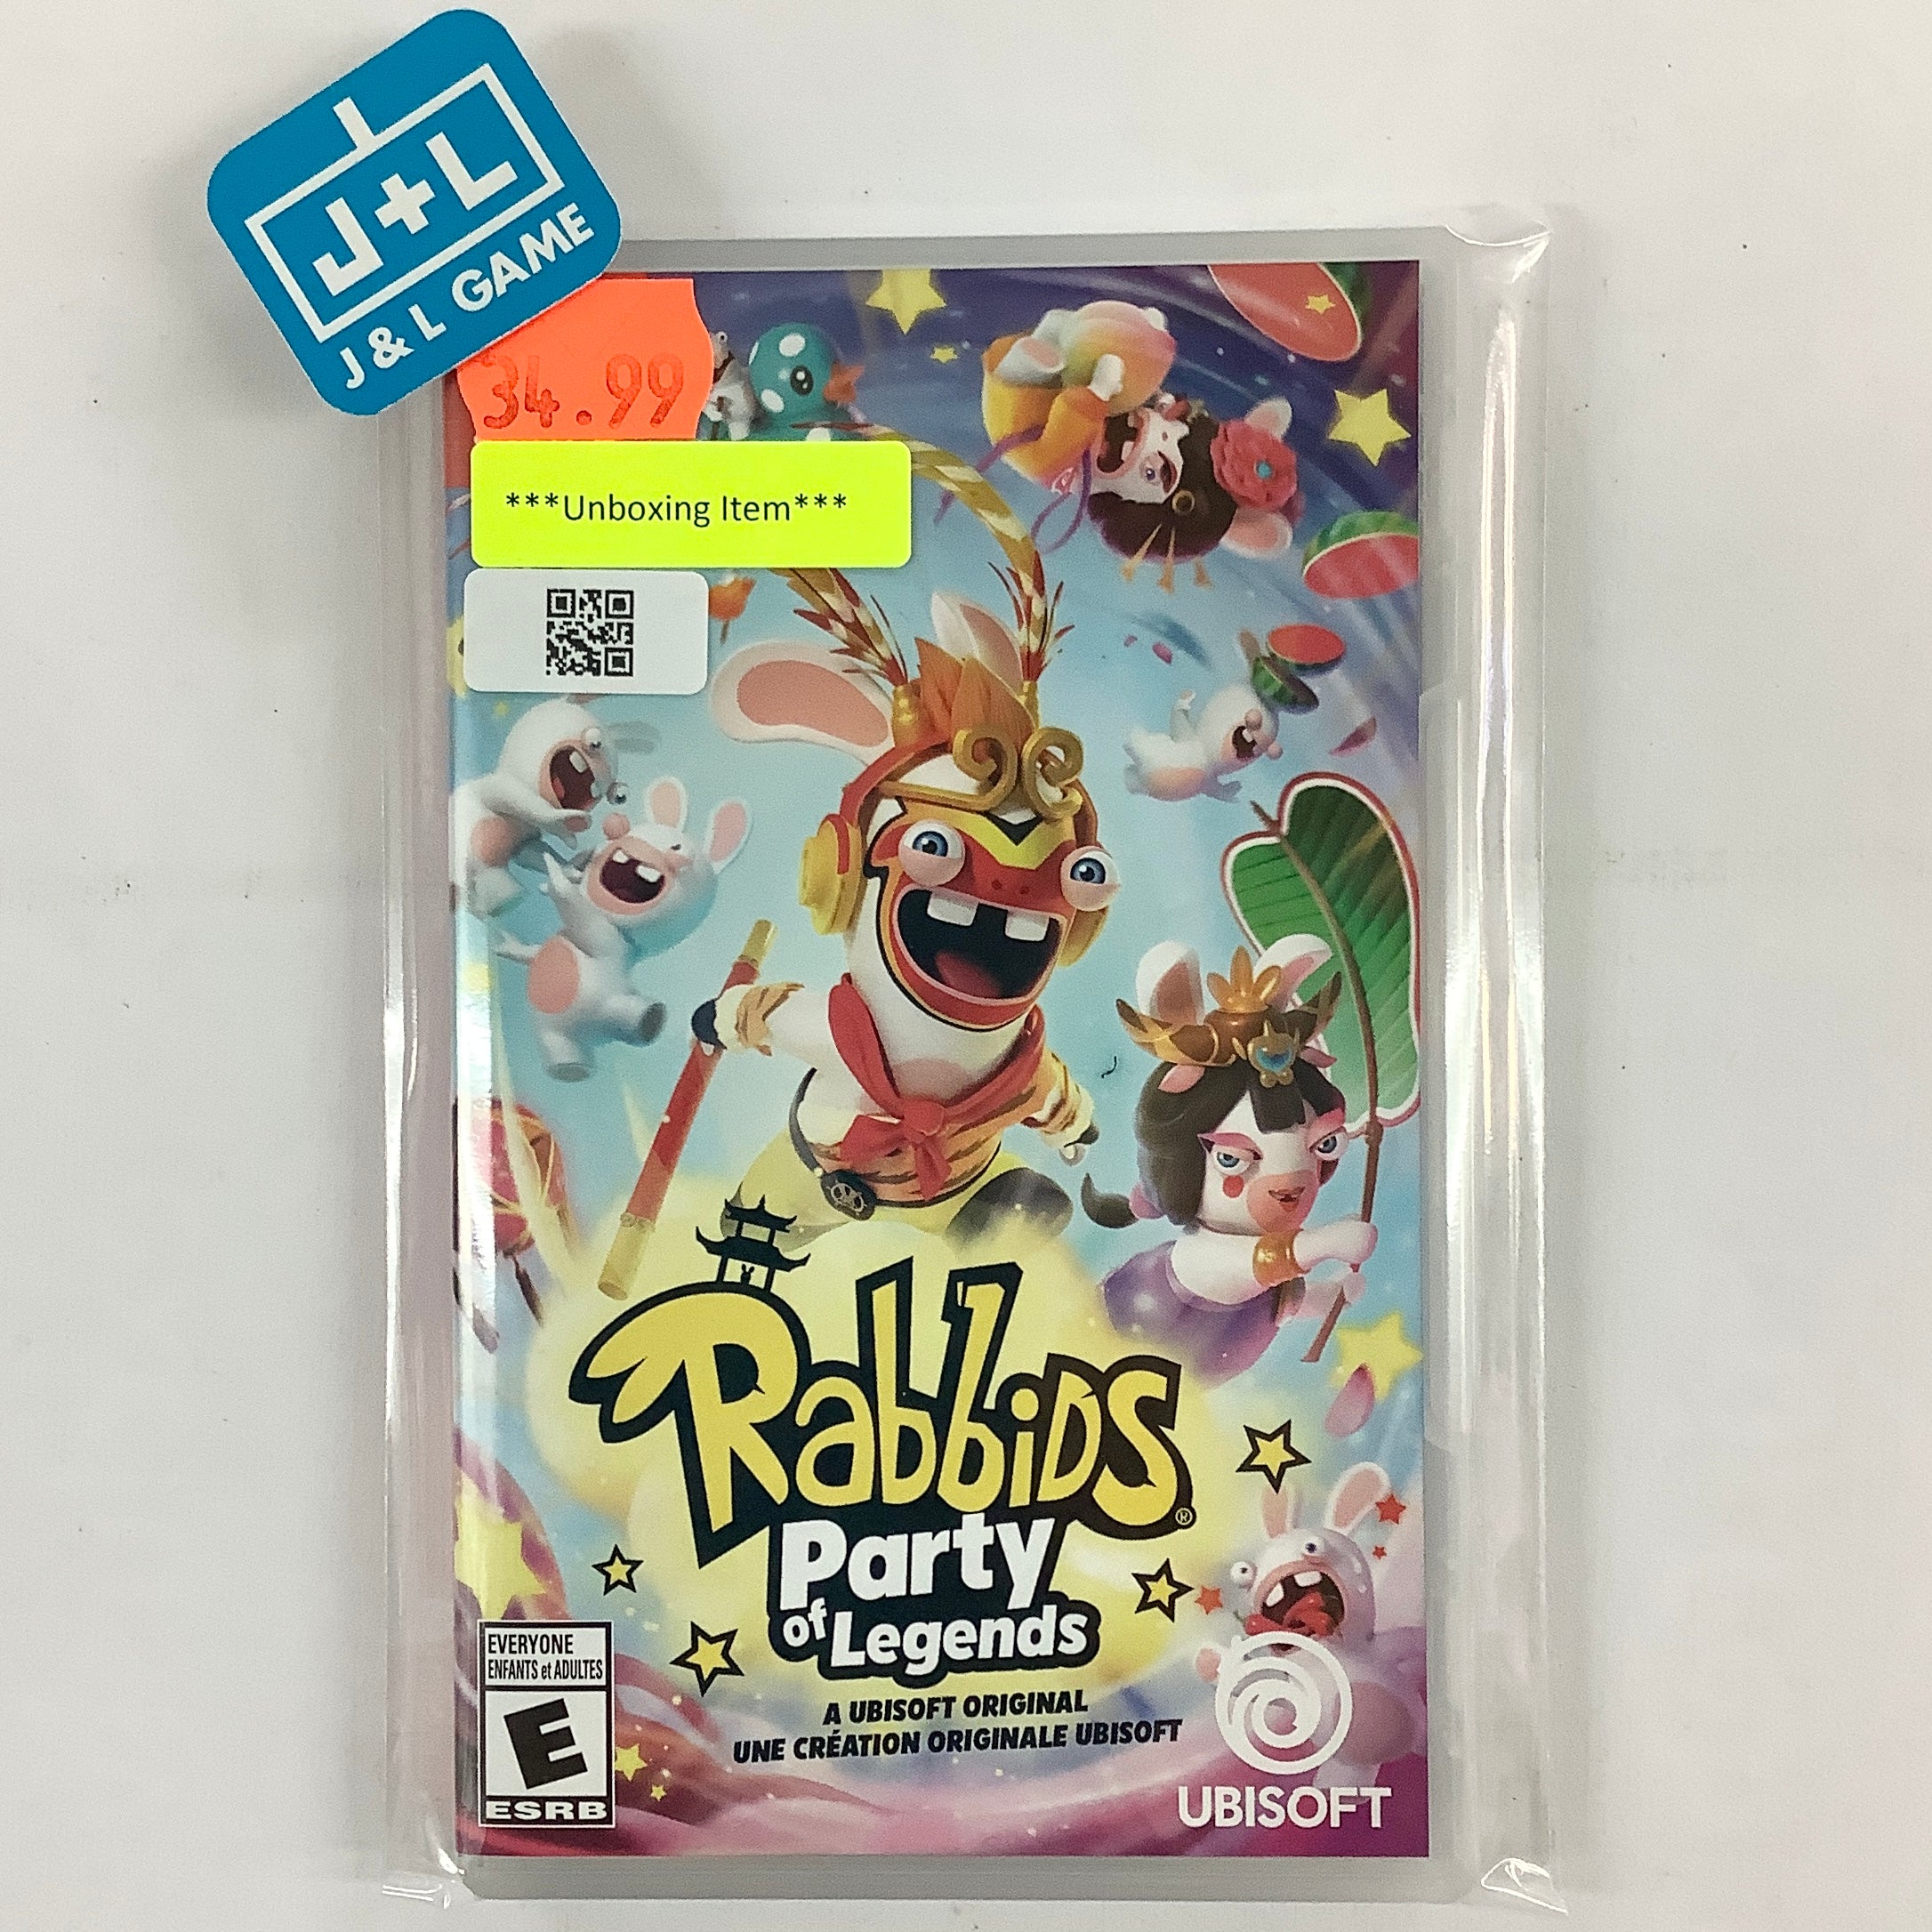 Rabbids: Party of Legends - (NSW) Nintendo Switch [UNBOXING] Video Games Ubisoft   